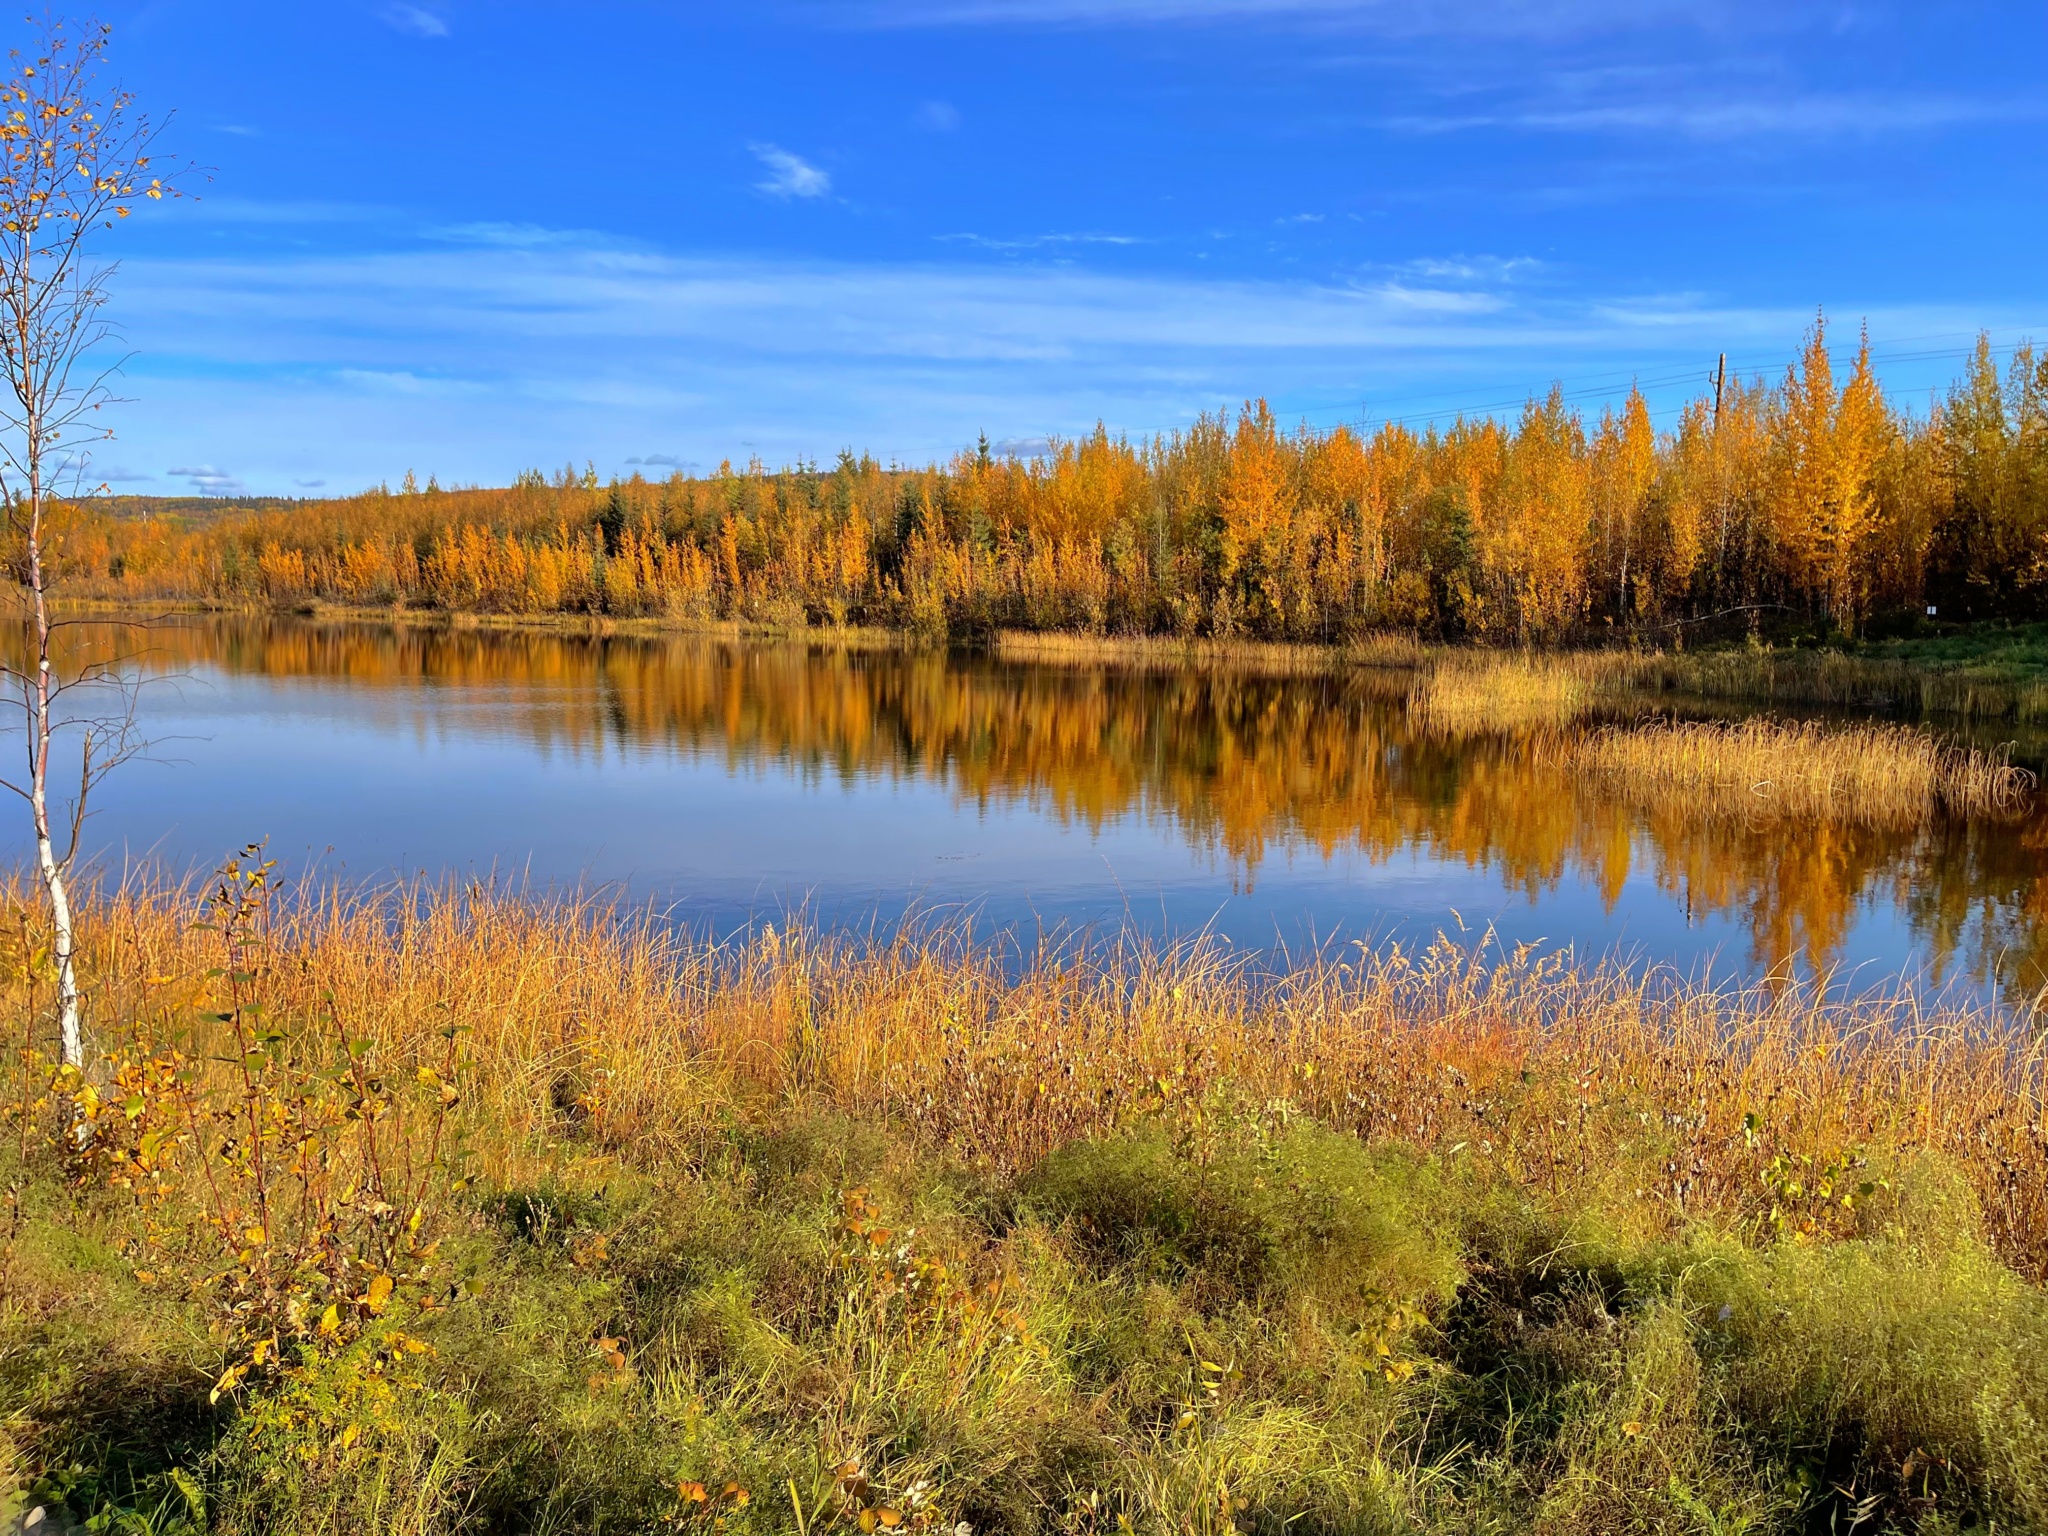 A-h-h-h….Fairbanks in the Fall